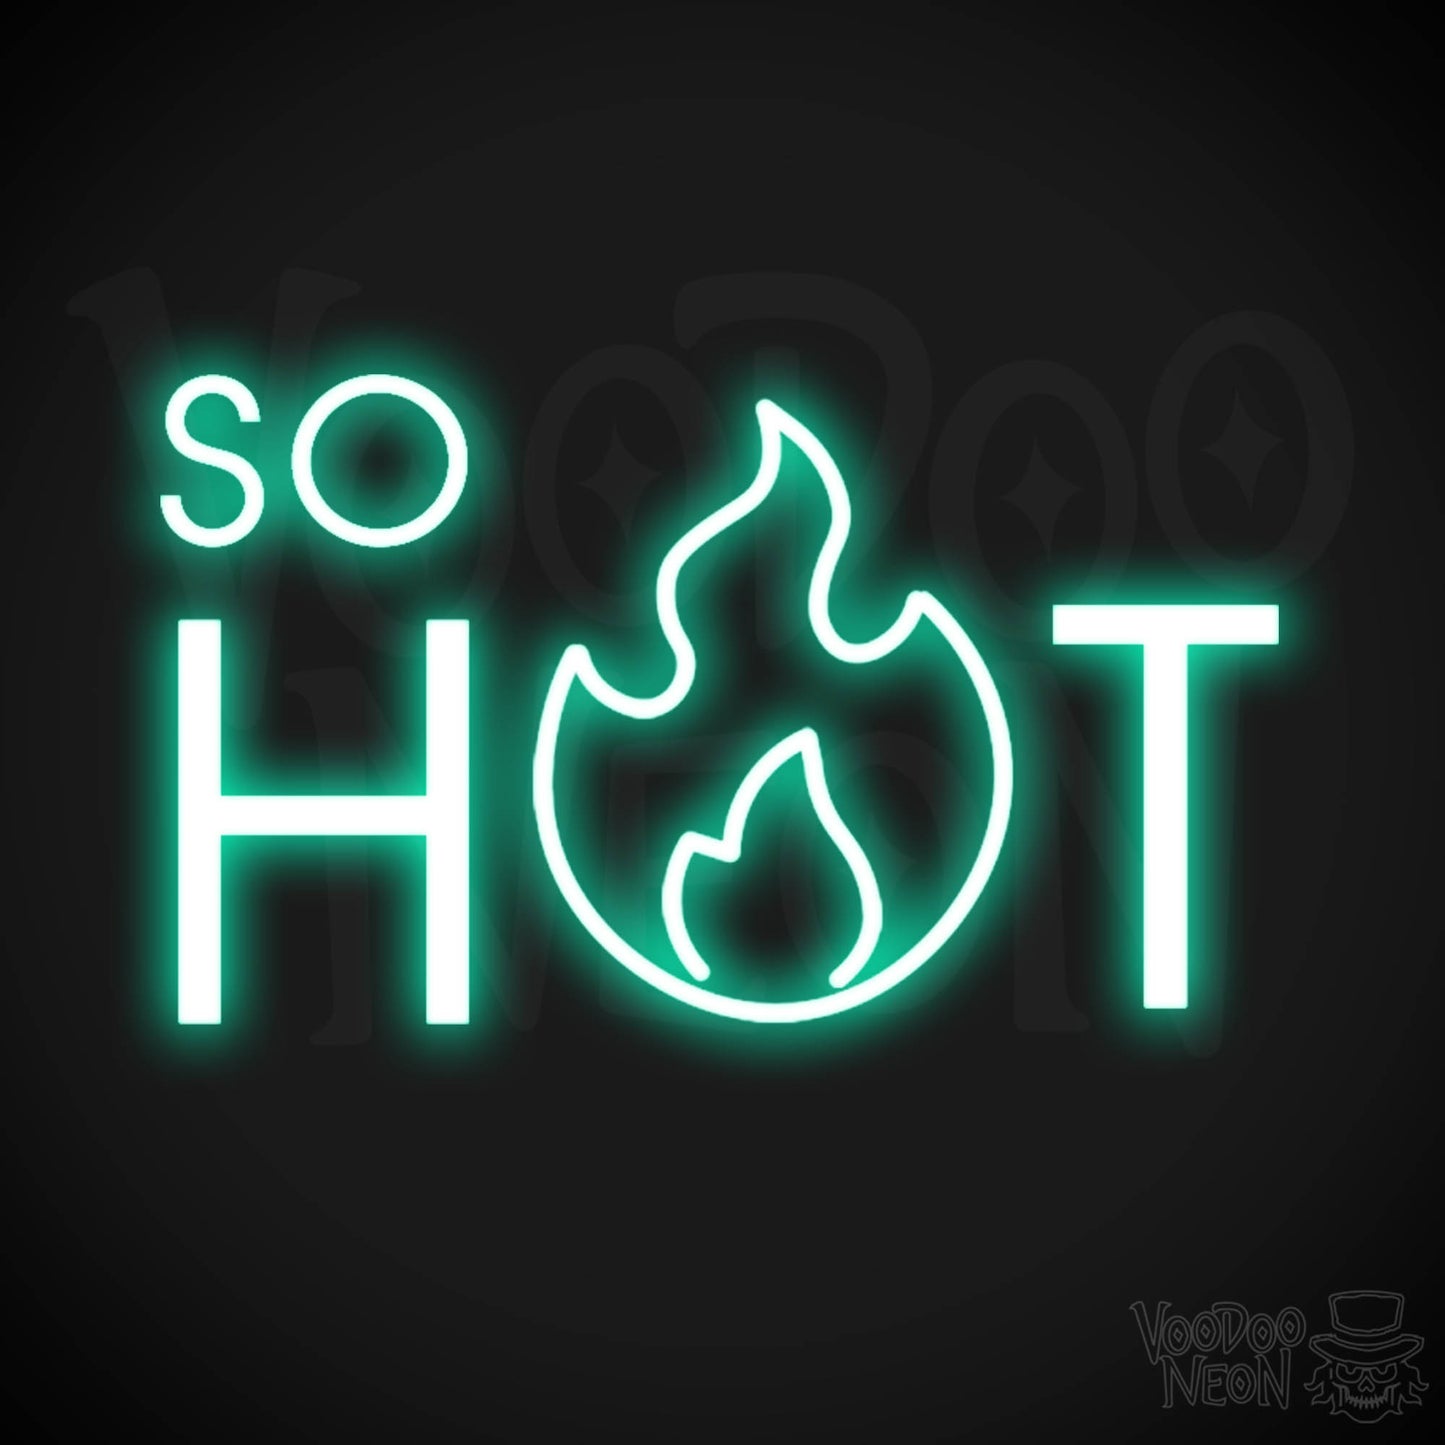 So Hot Neon Sign - Neon So Hot Sign - LED Neon Wall Art - Color Light Green